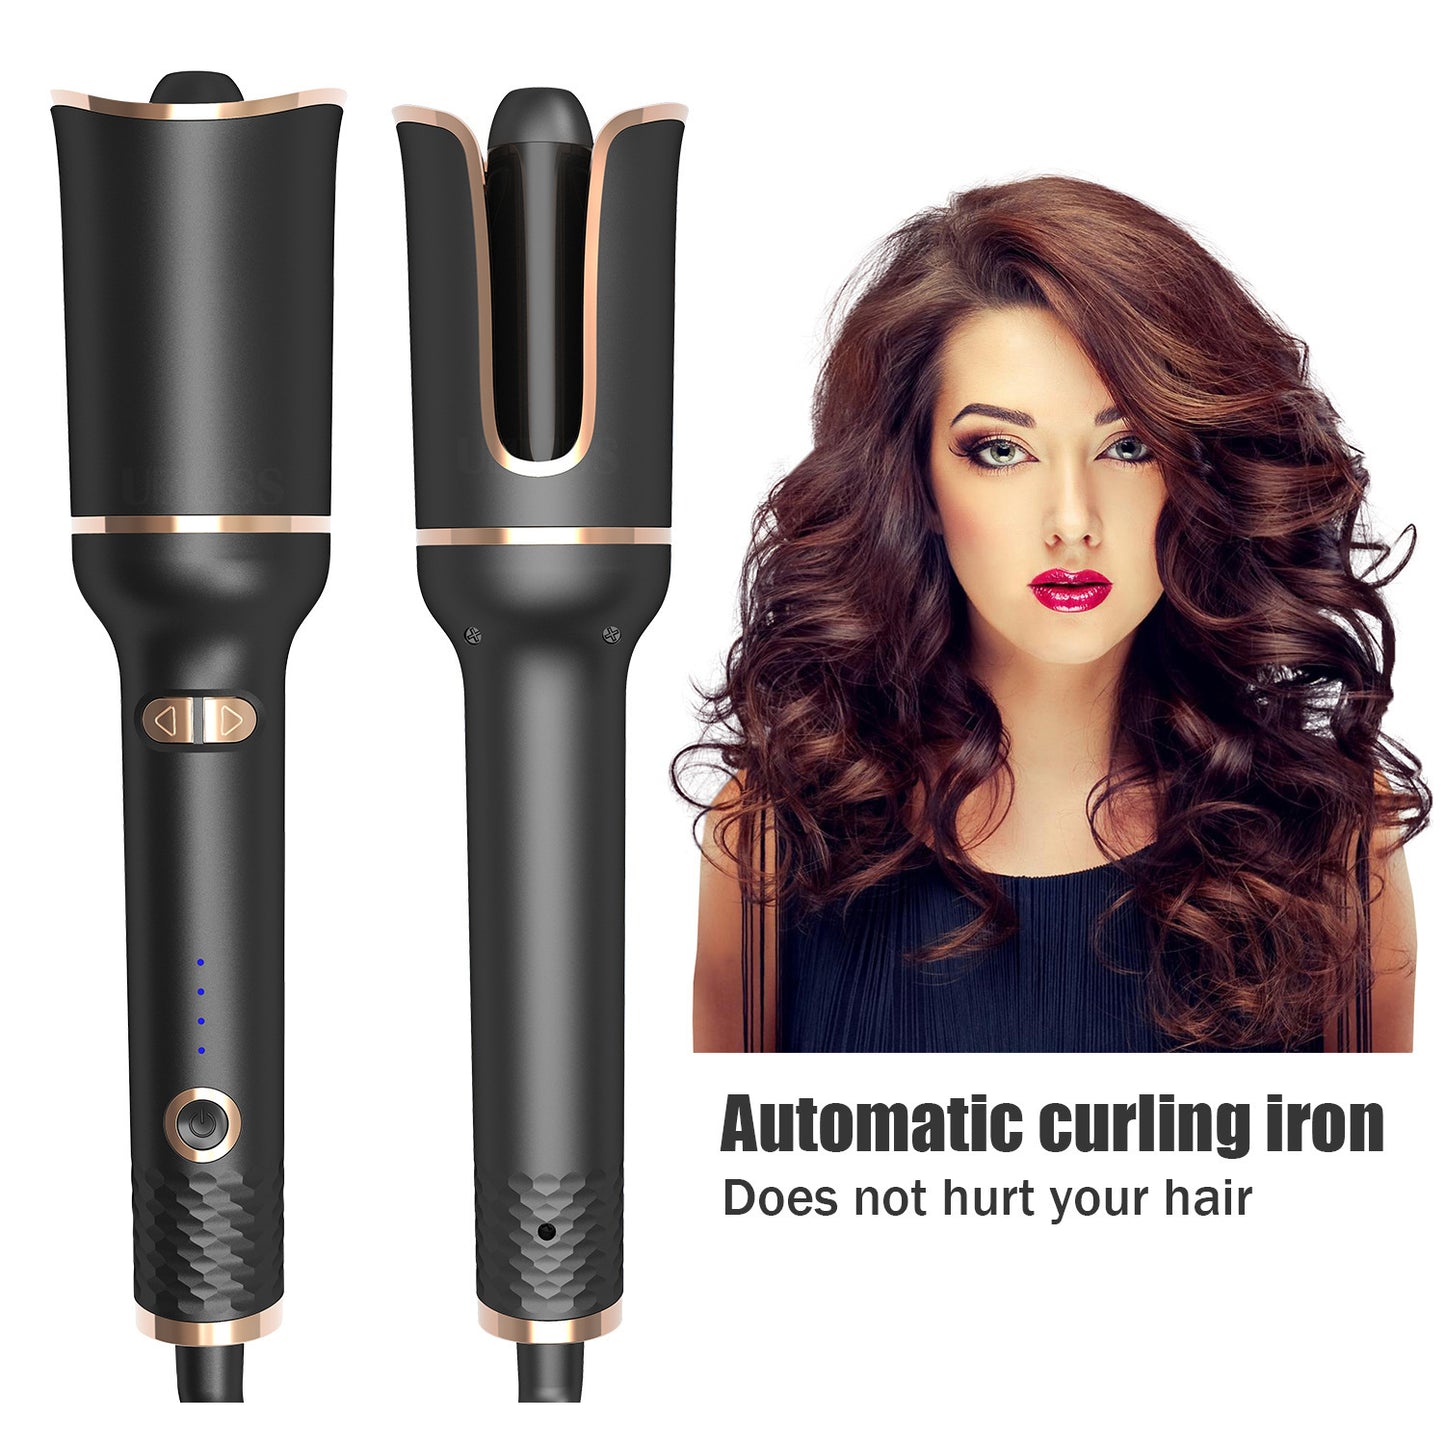 Effortless Curls with the Black Automatic Spiral Electric Curling Iron